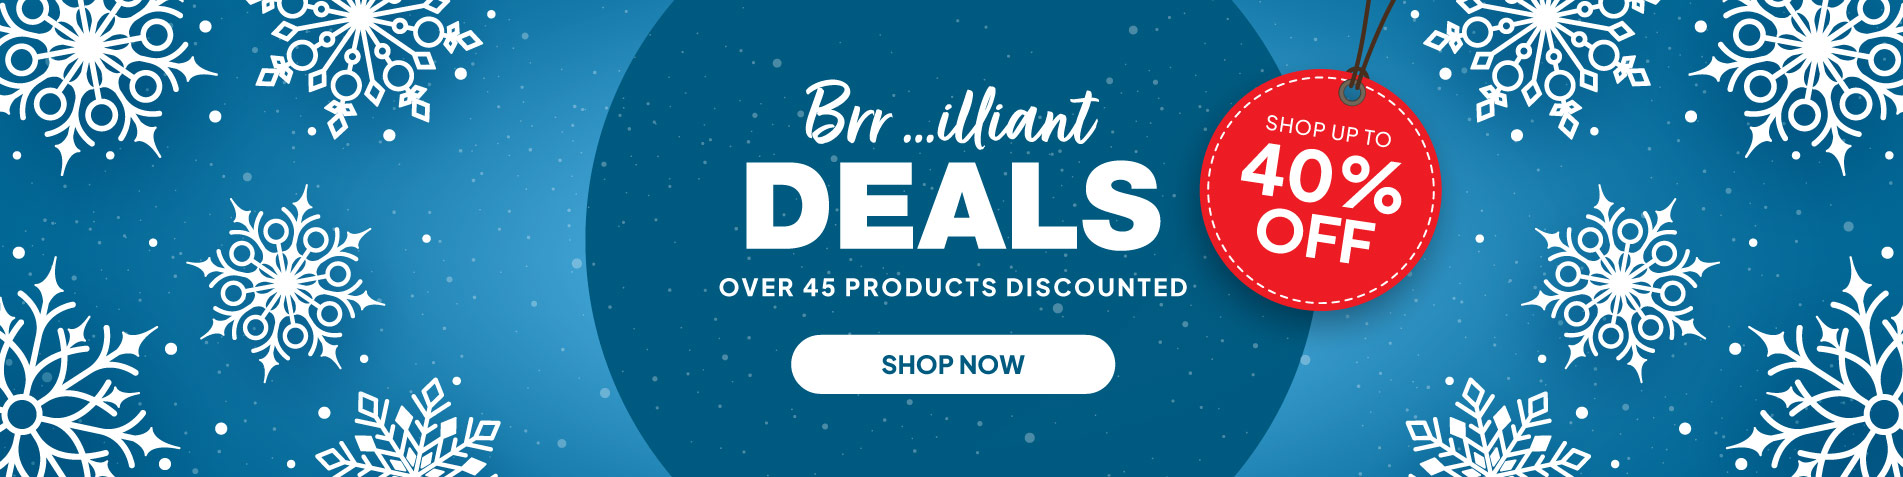 Brr...illiant DEALS. Over 45 products discounted. Shop up to 40% off.